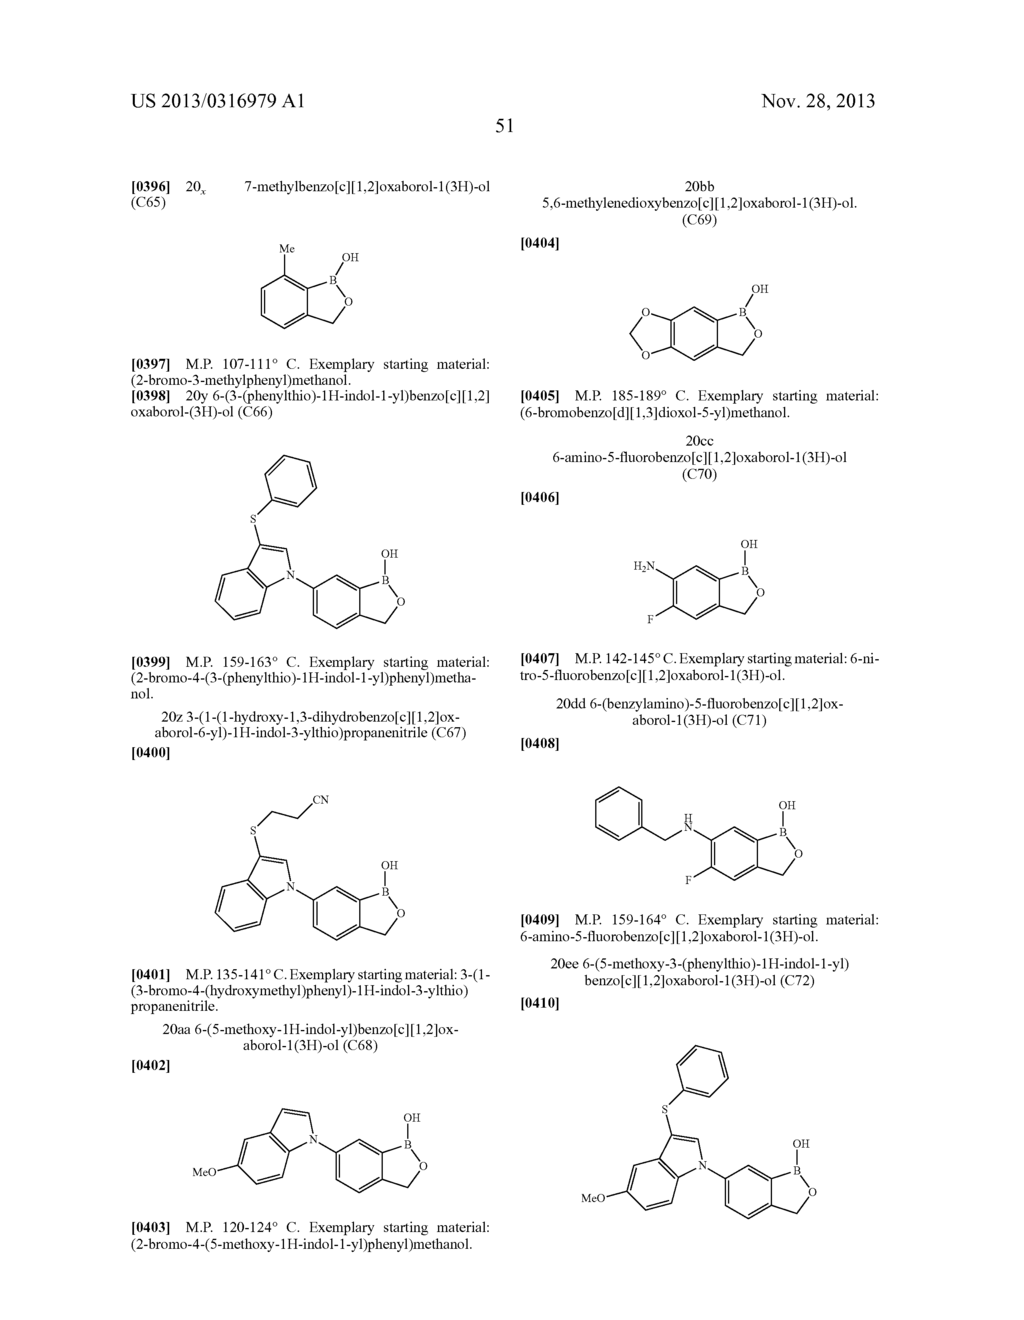 BORON-CONTAINING SMALL MOLECULES AS ANTI-INFLAMMATORY AGENTS - diagram, schematic, and image 73